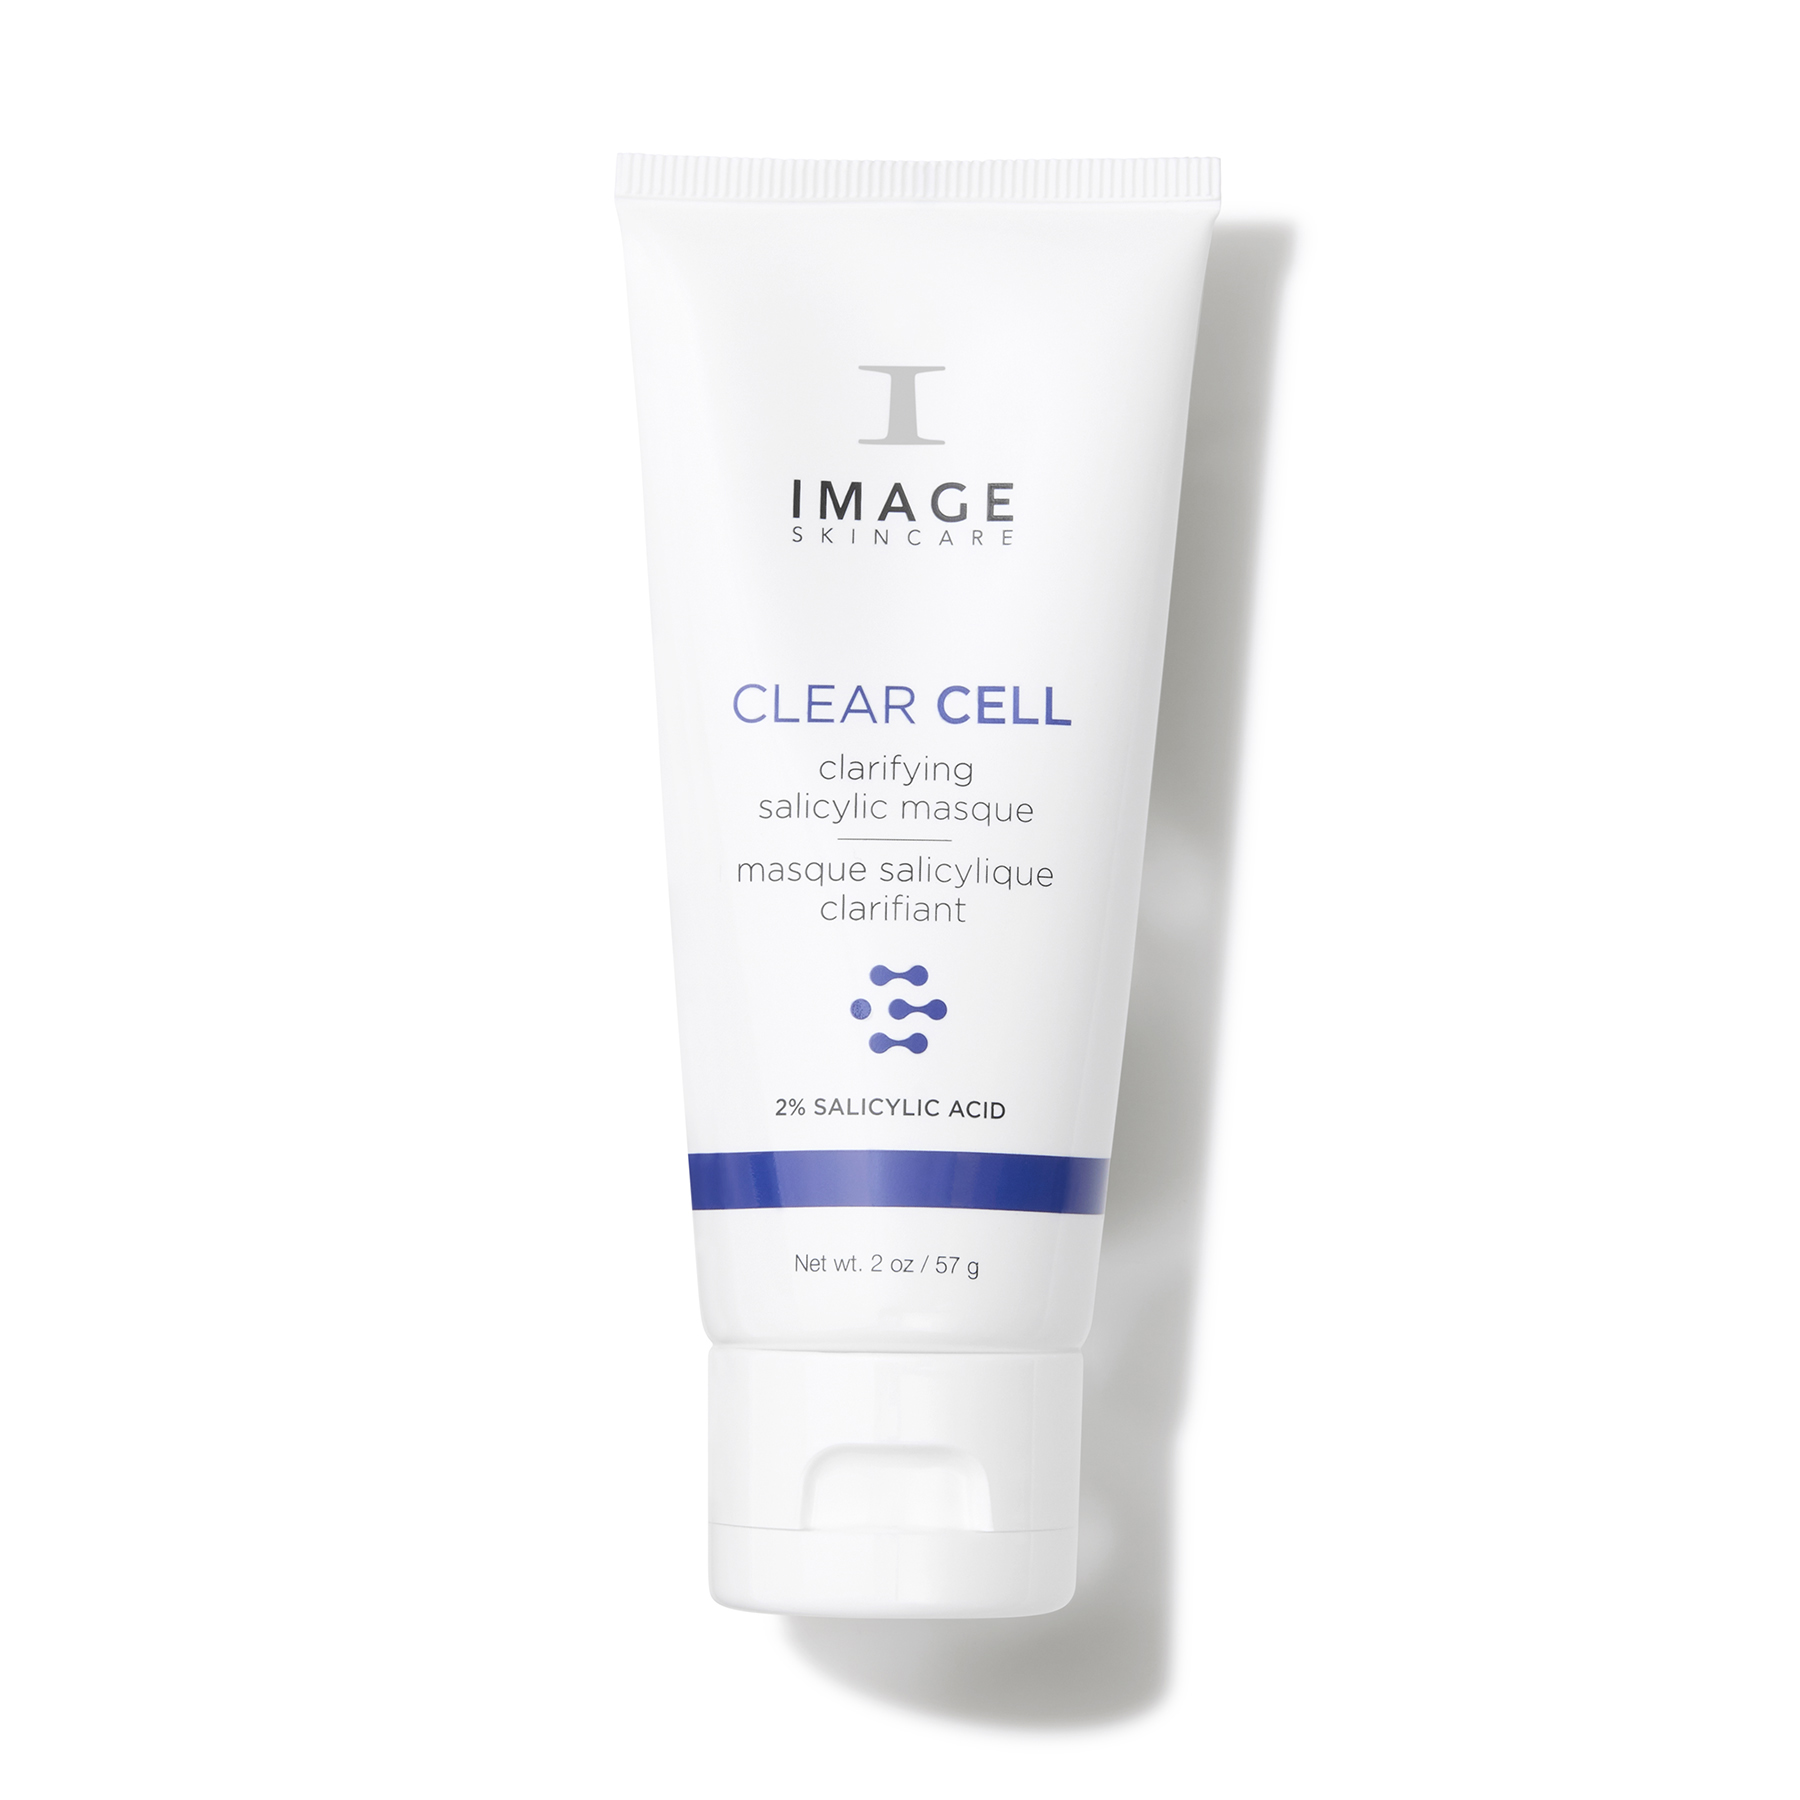 Clear cell Masque